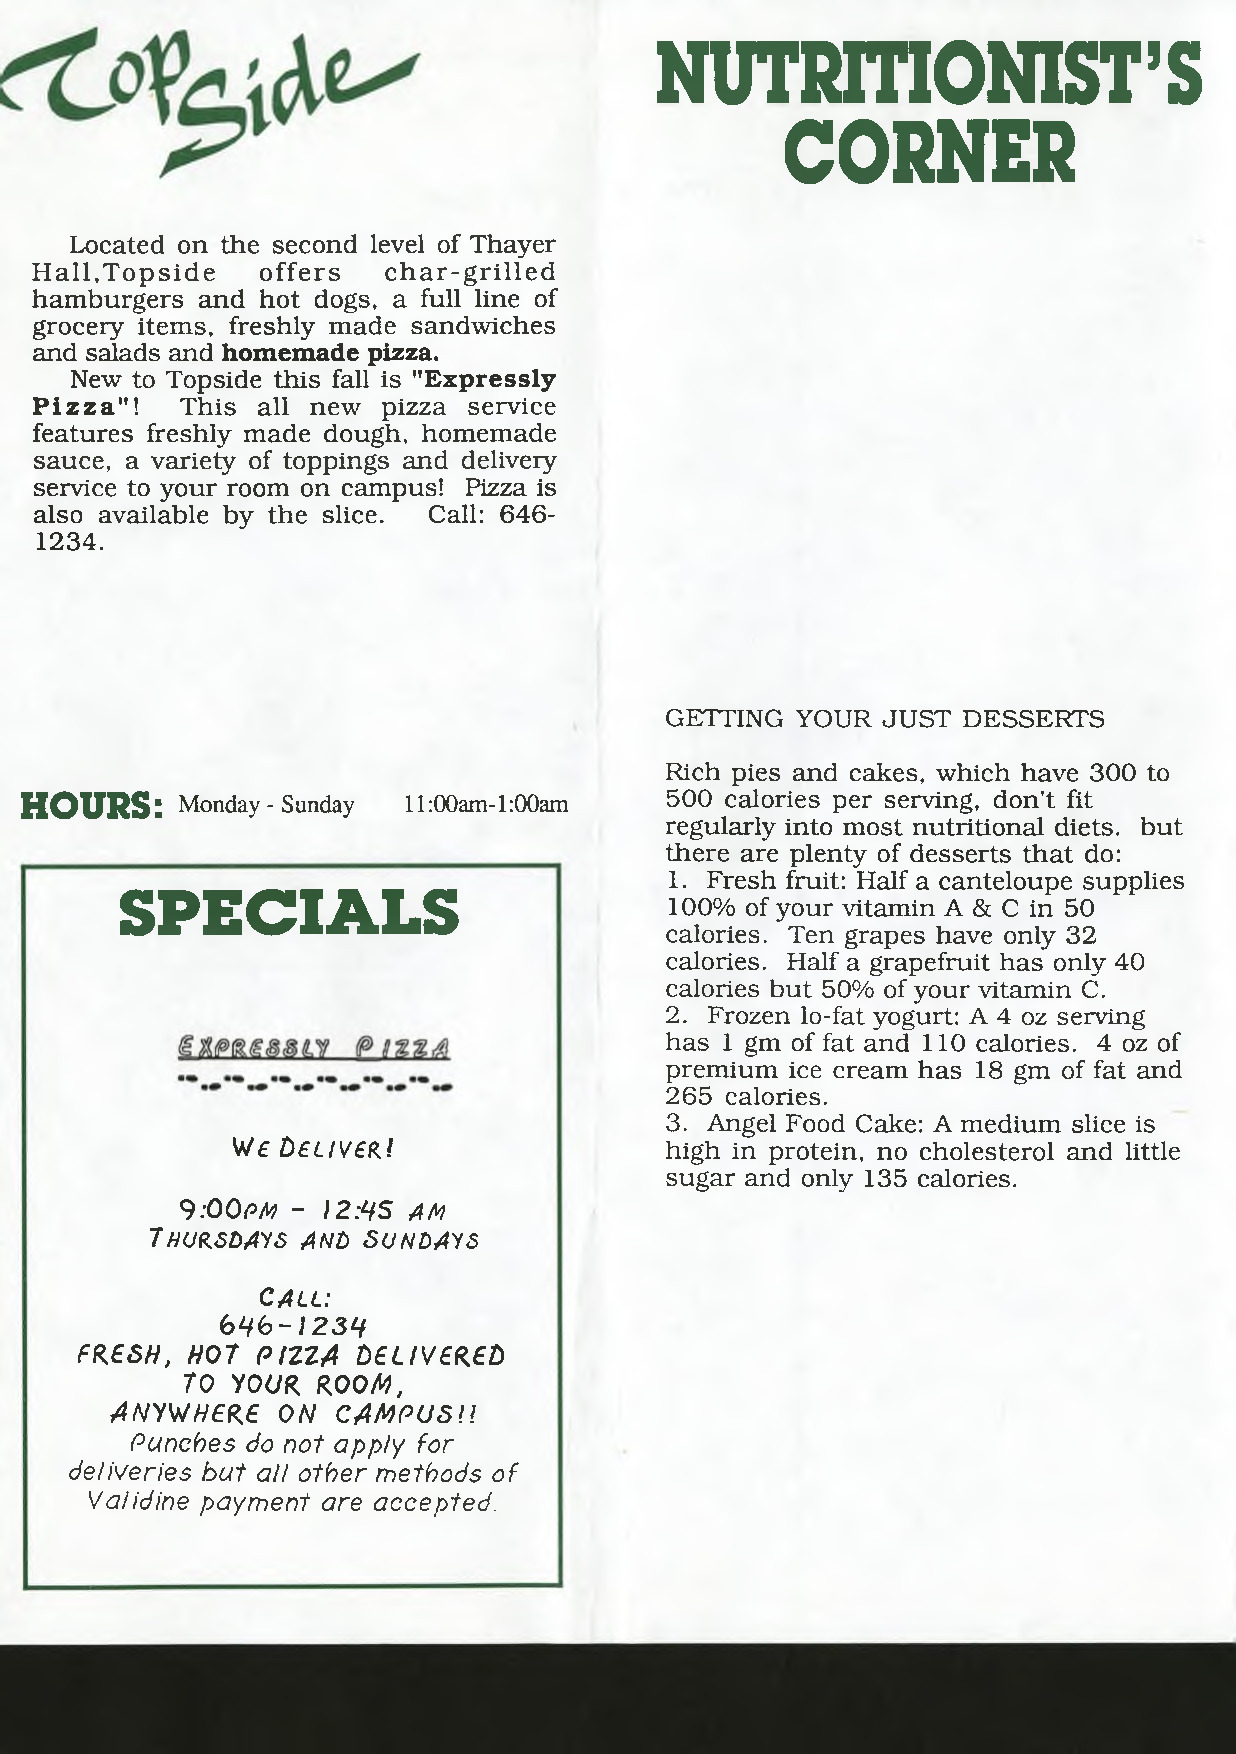 Dining Services at Dartmouth Pamphlet